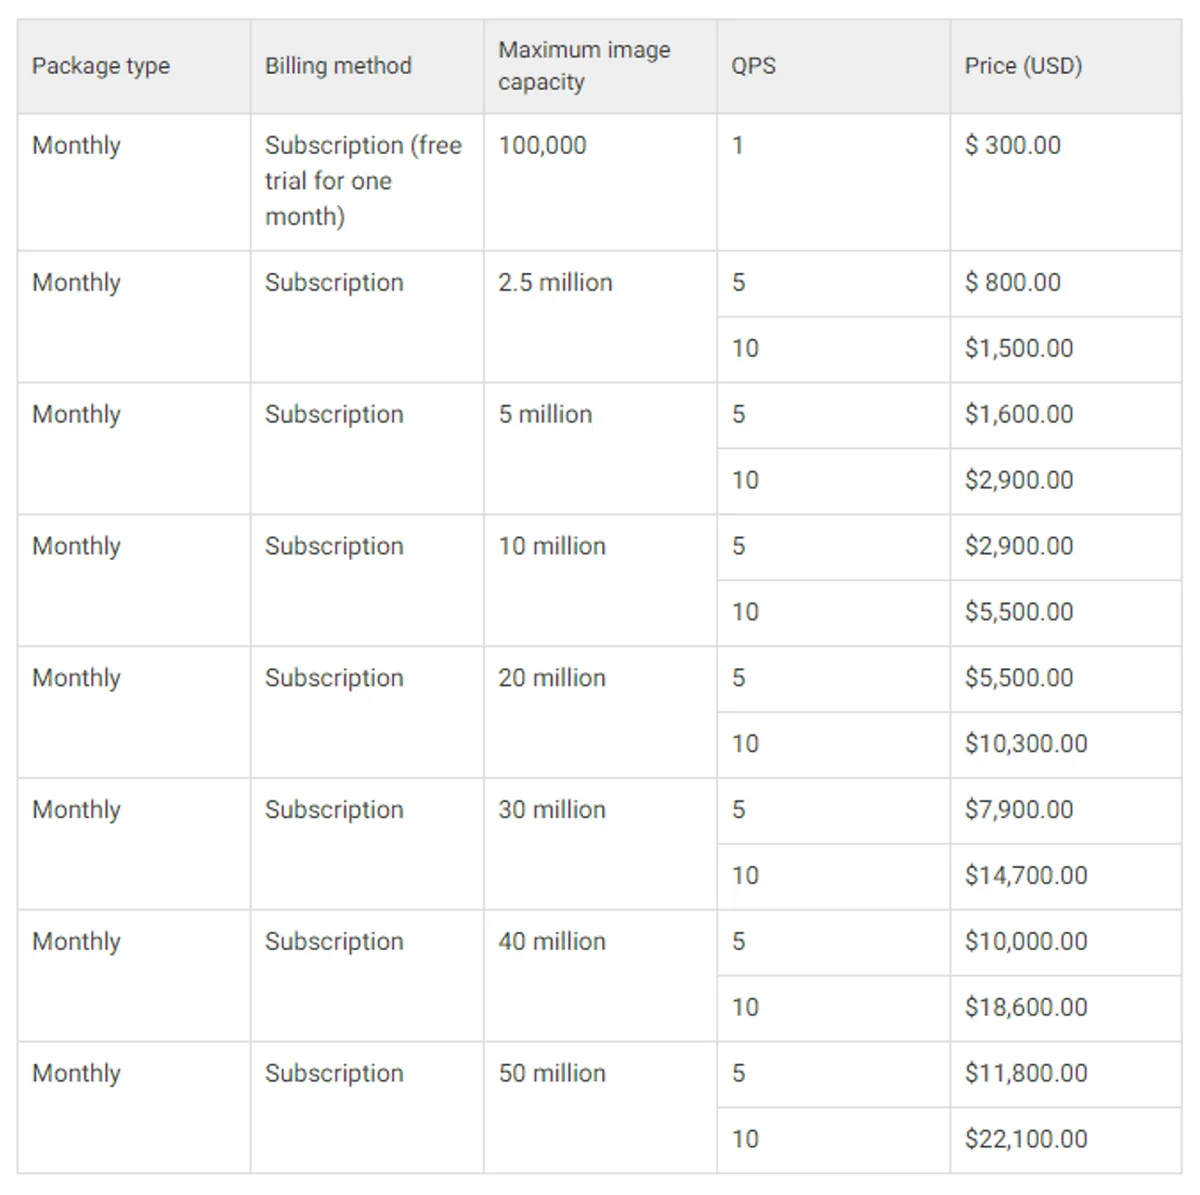 Alibaba Image Search Pricing Plan